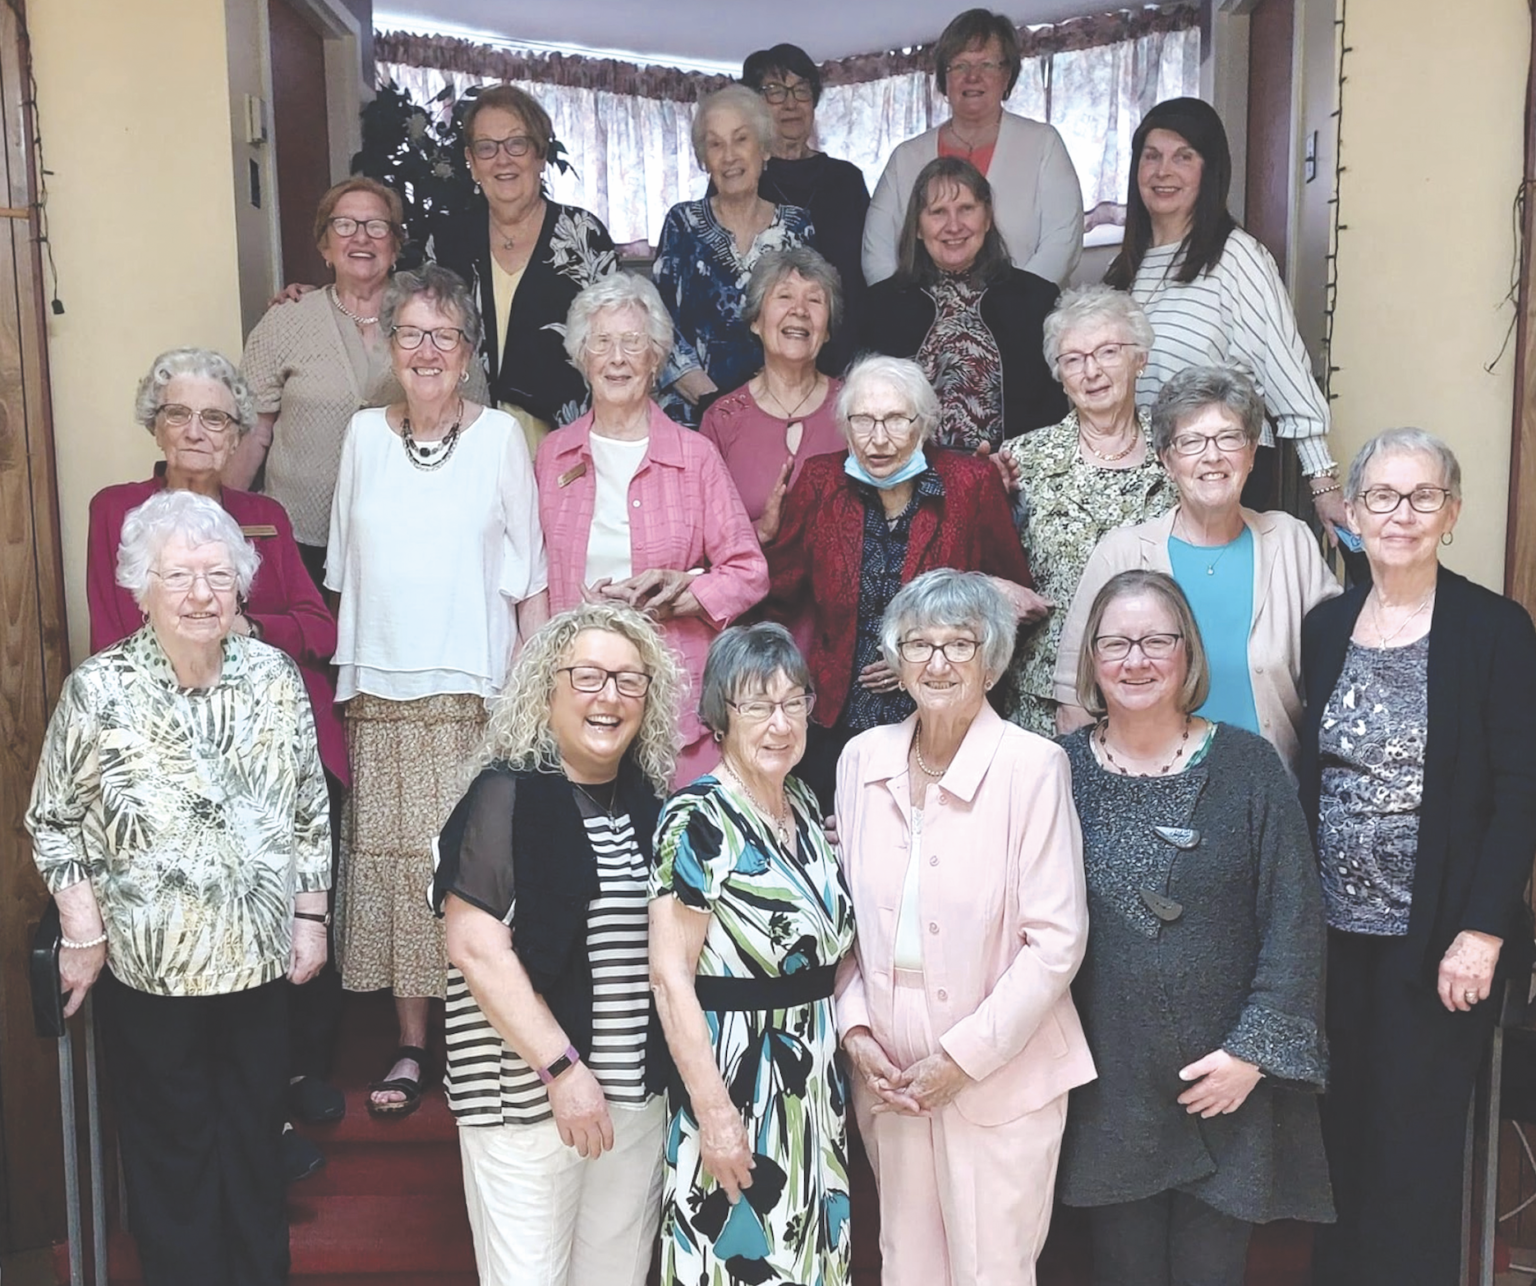 gathered ladies of the ACW of St. Augustine's in St. John's